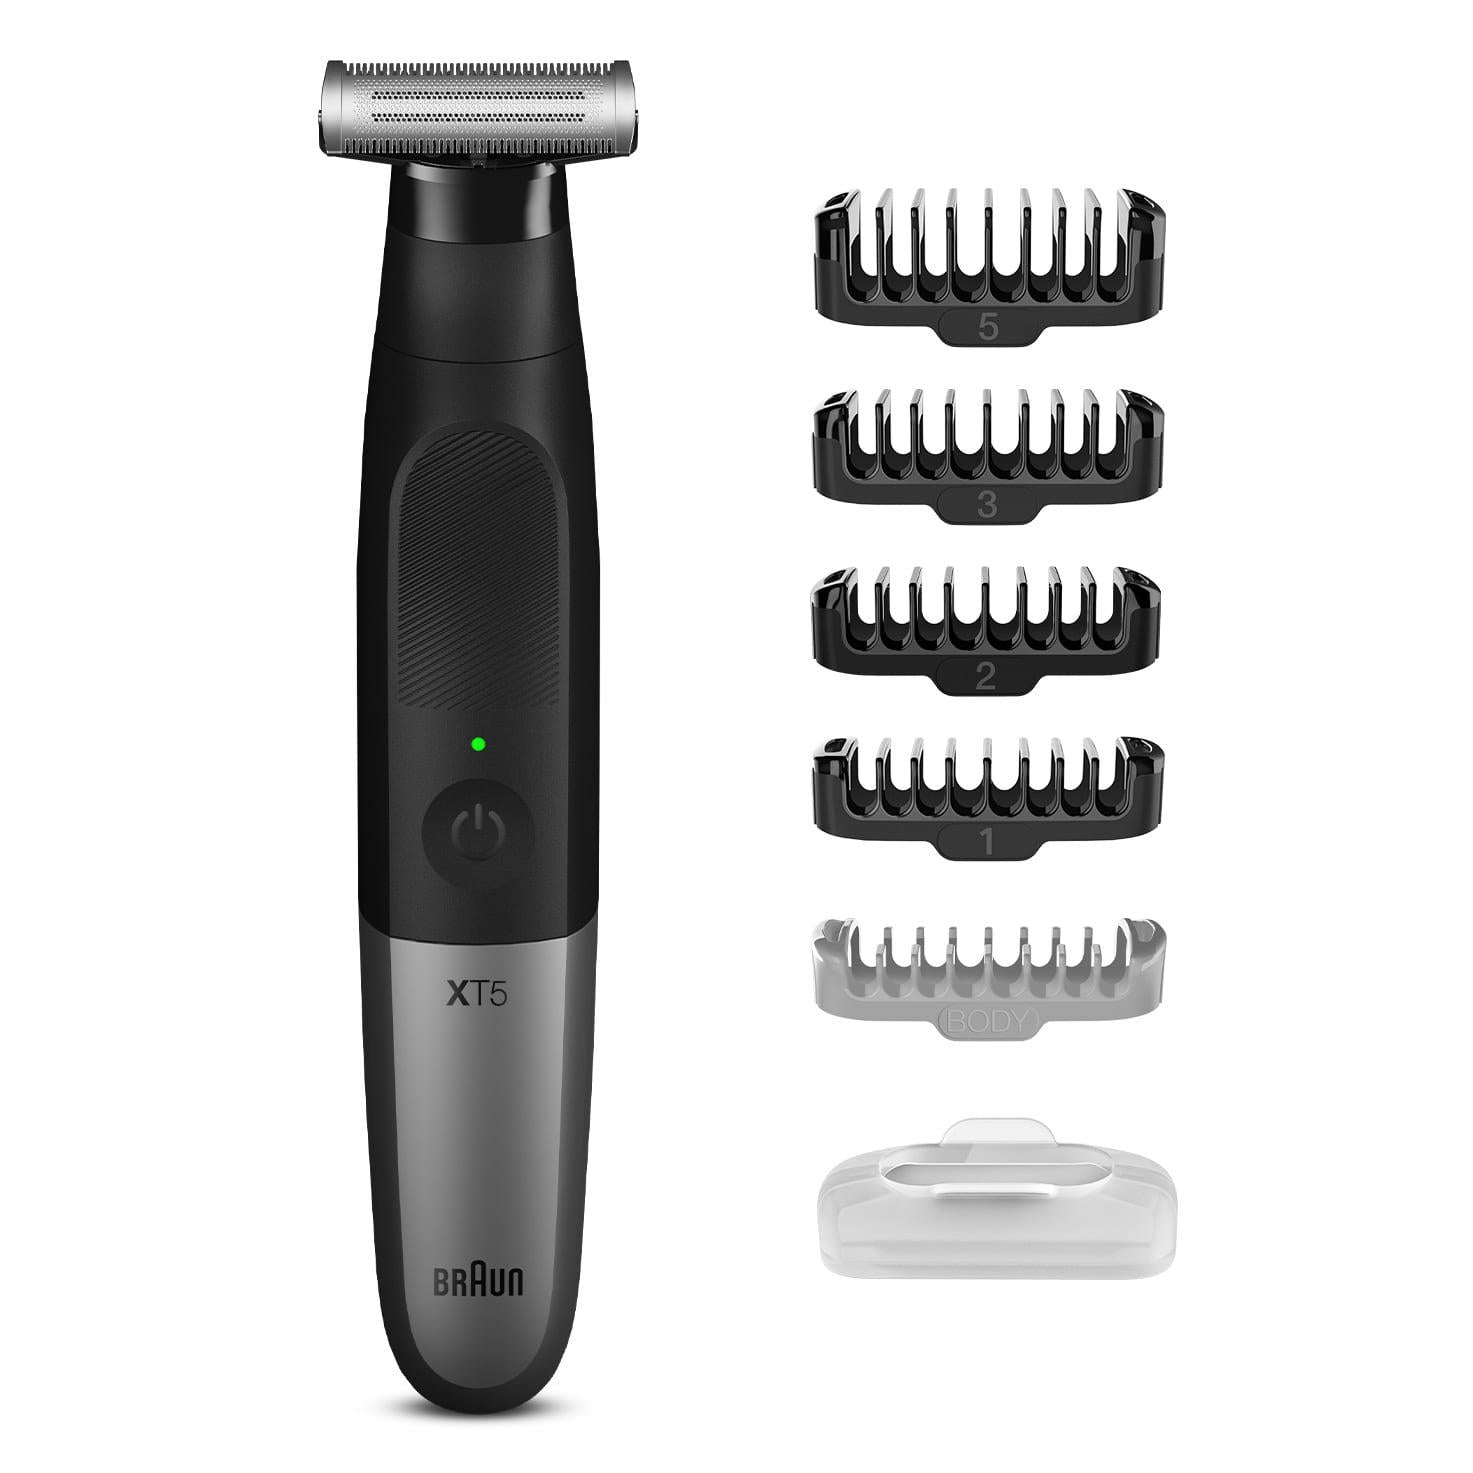 Braun Series X XT5100 Wet & Dry all-in-one tool with 5 attachments, black / silver - Healthxpress.ie